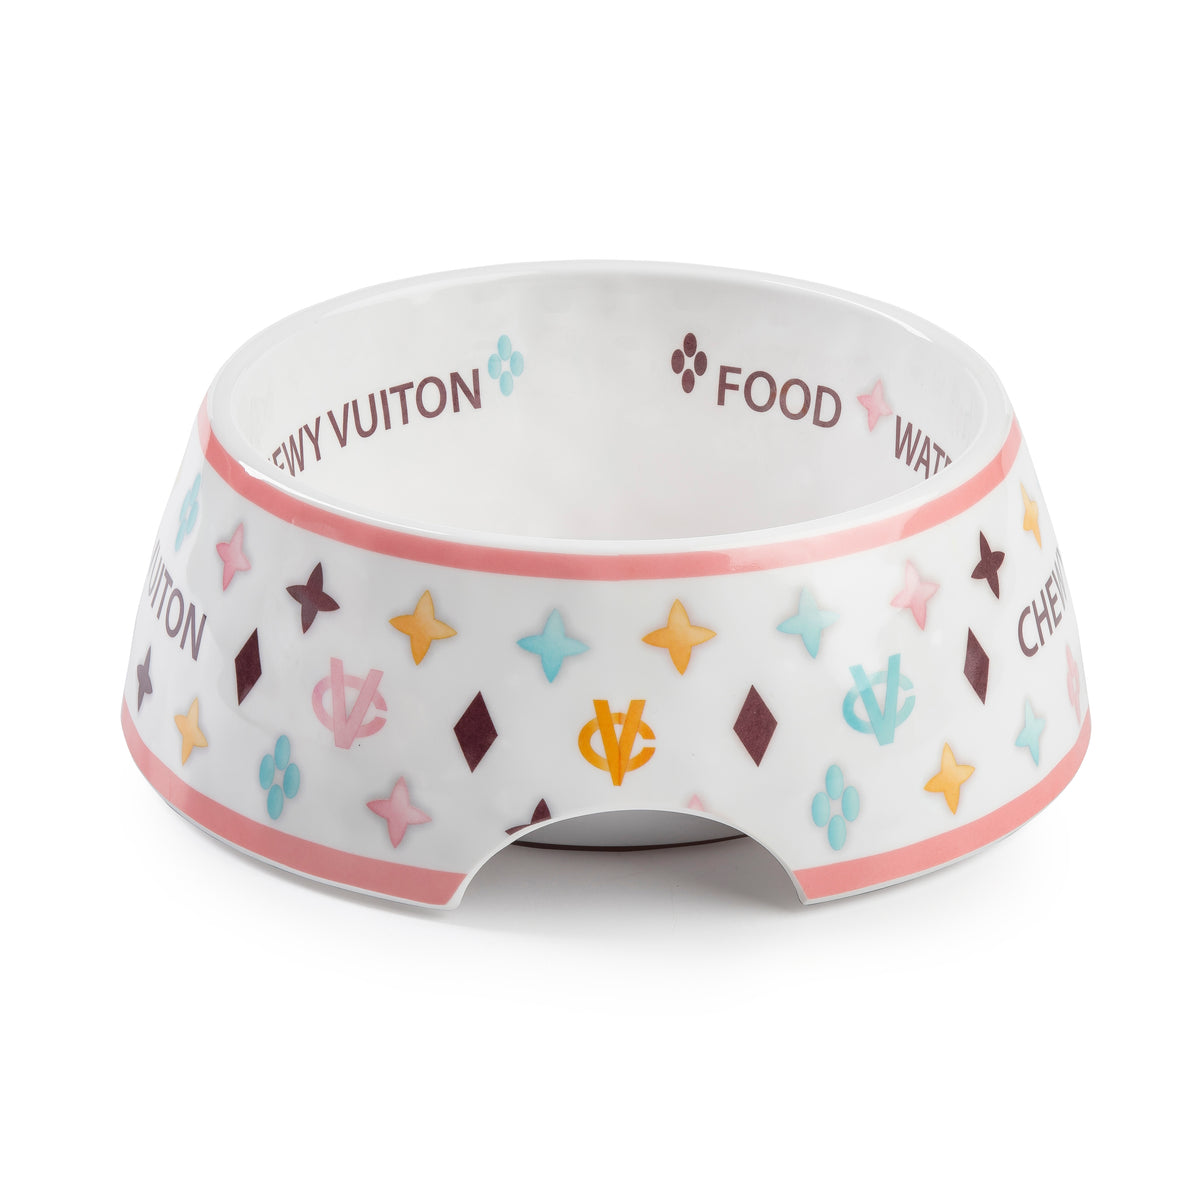 Haute Diggity Chewy V Brown Check Dog Bowl –